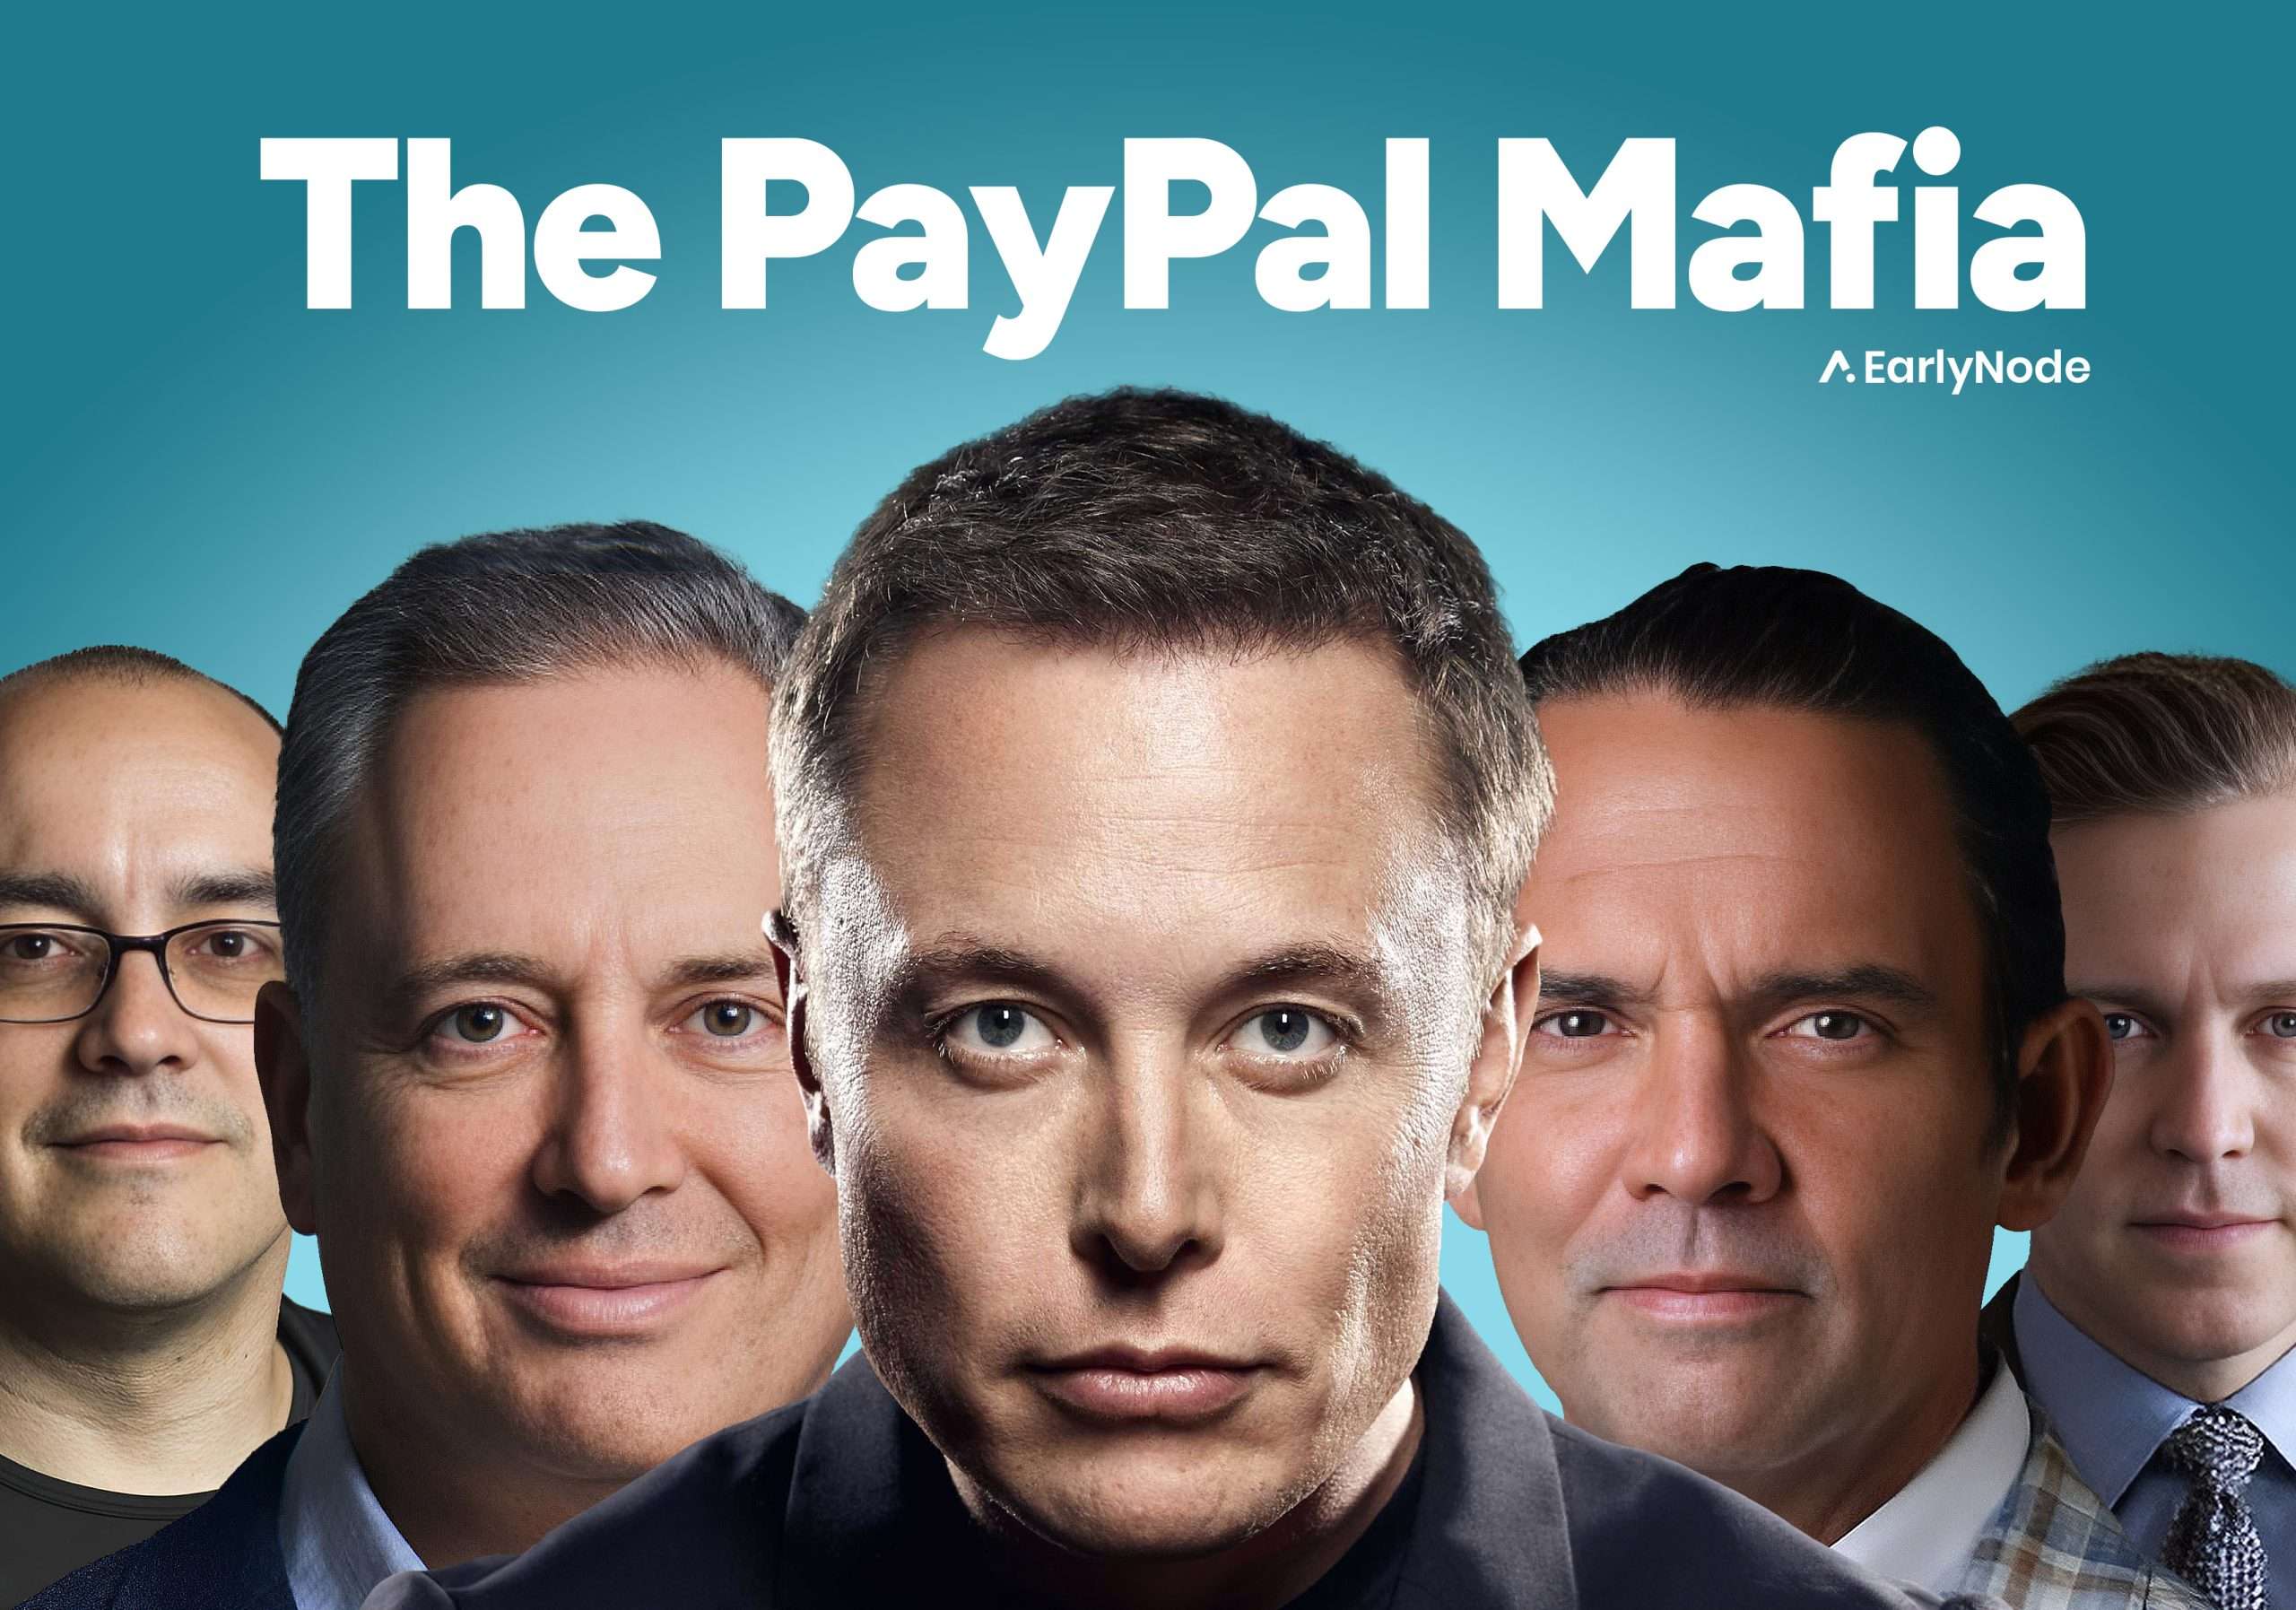 Who are the Members of the PayPal Mafia?